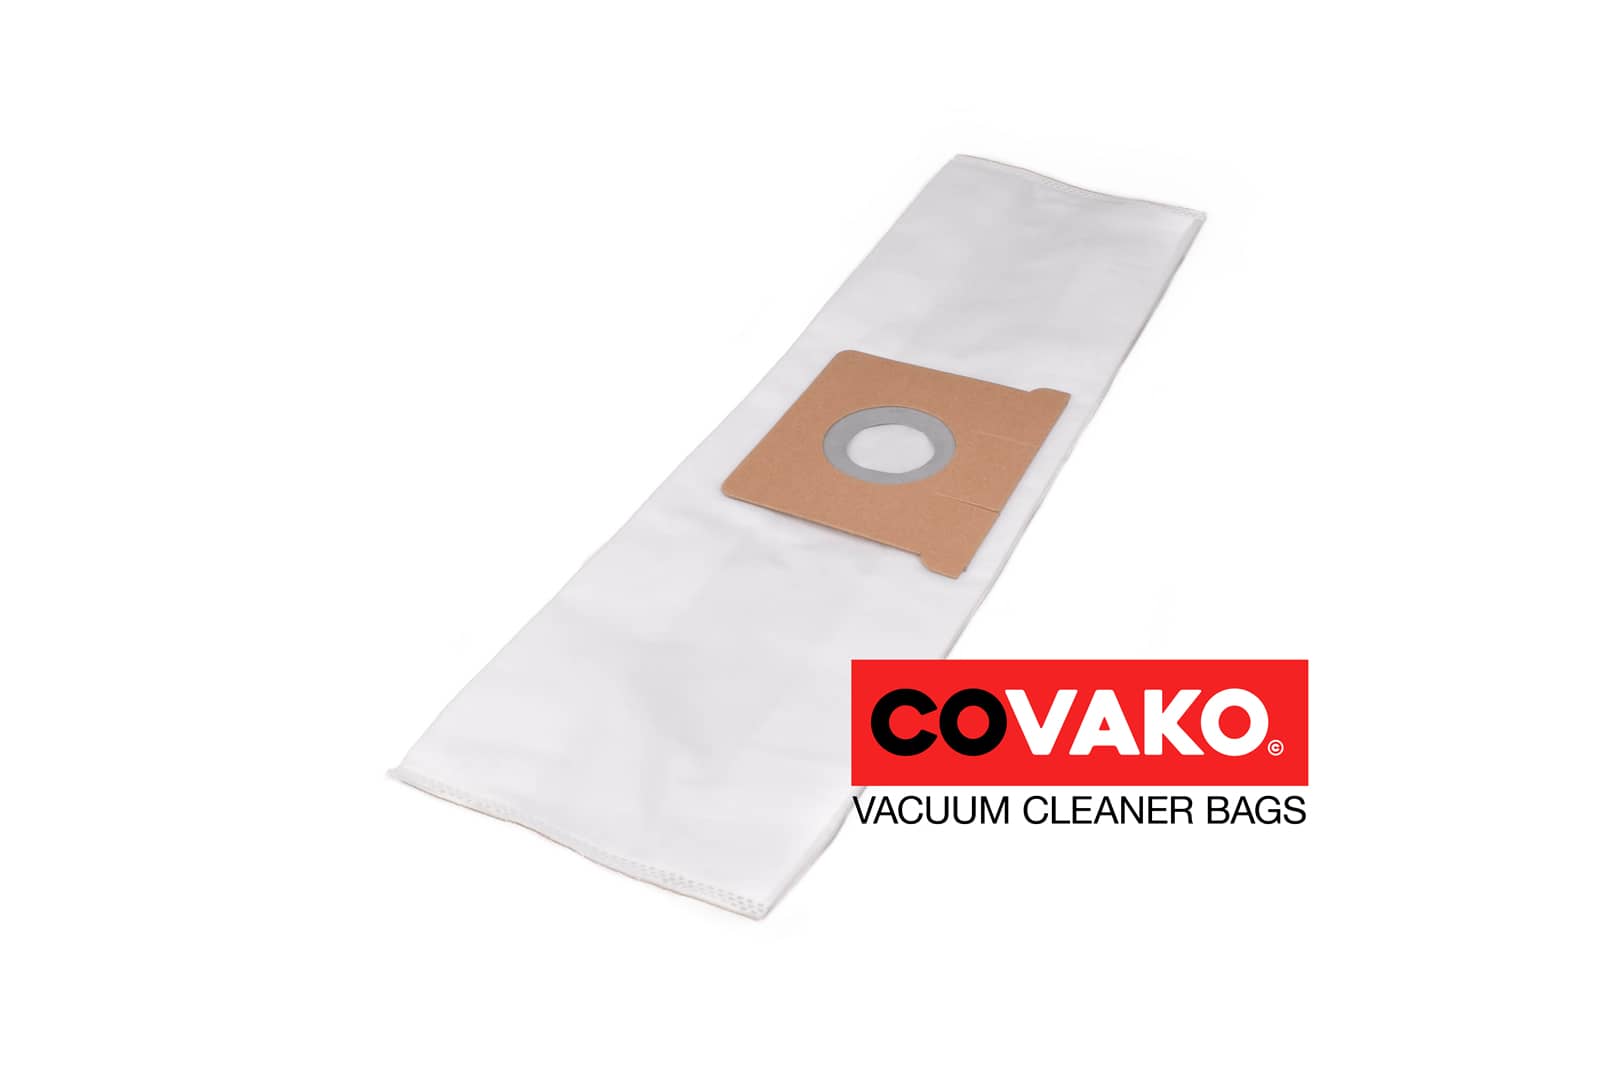 Gansow G 10P + Hepa / Synthesis - Gansow vacuum cleaner bags